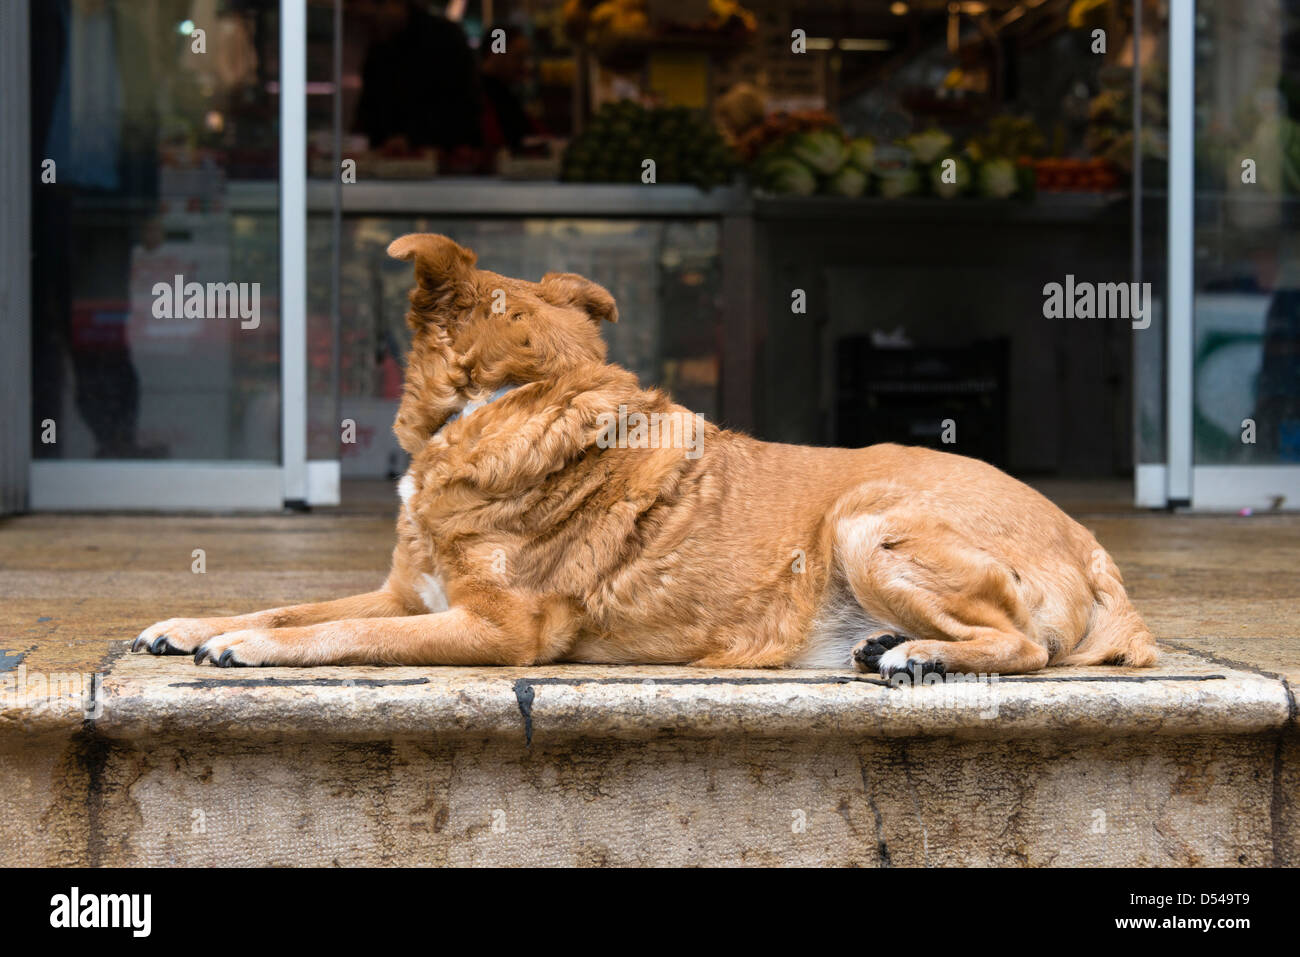 Dog outside shop waiting for owner Stock Photo